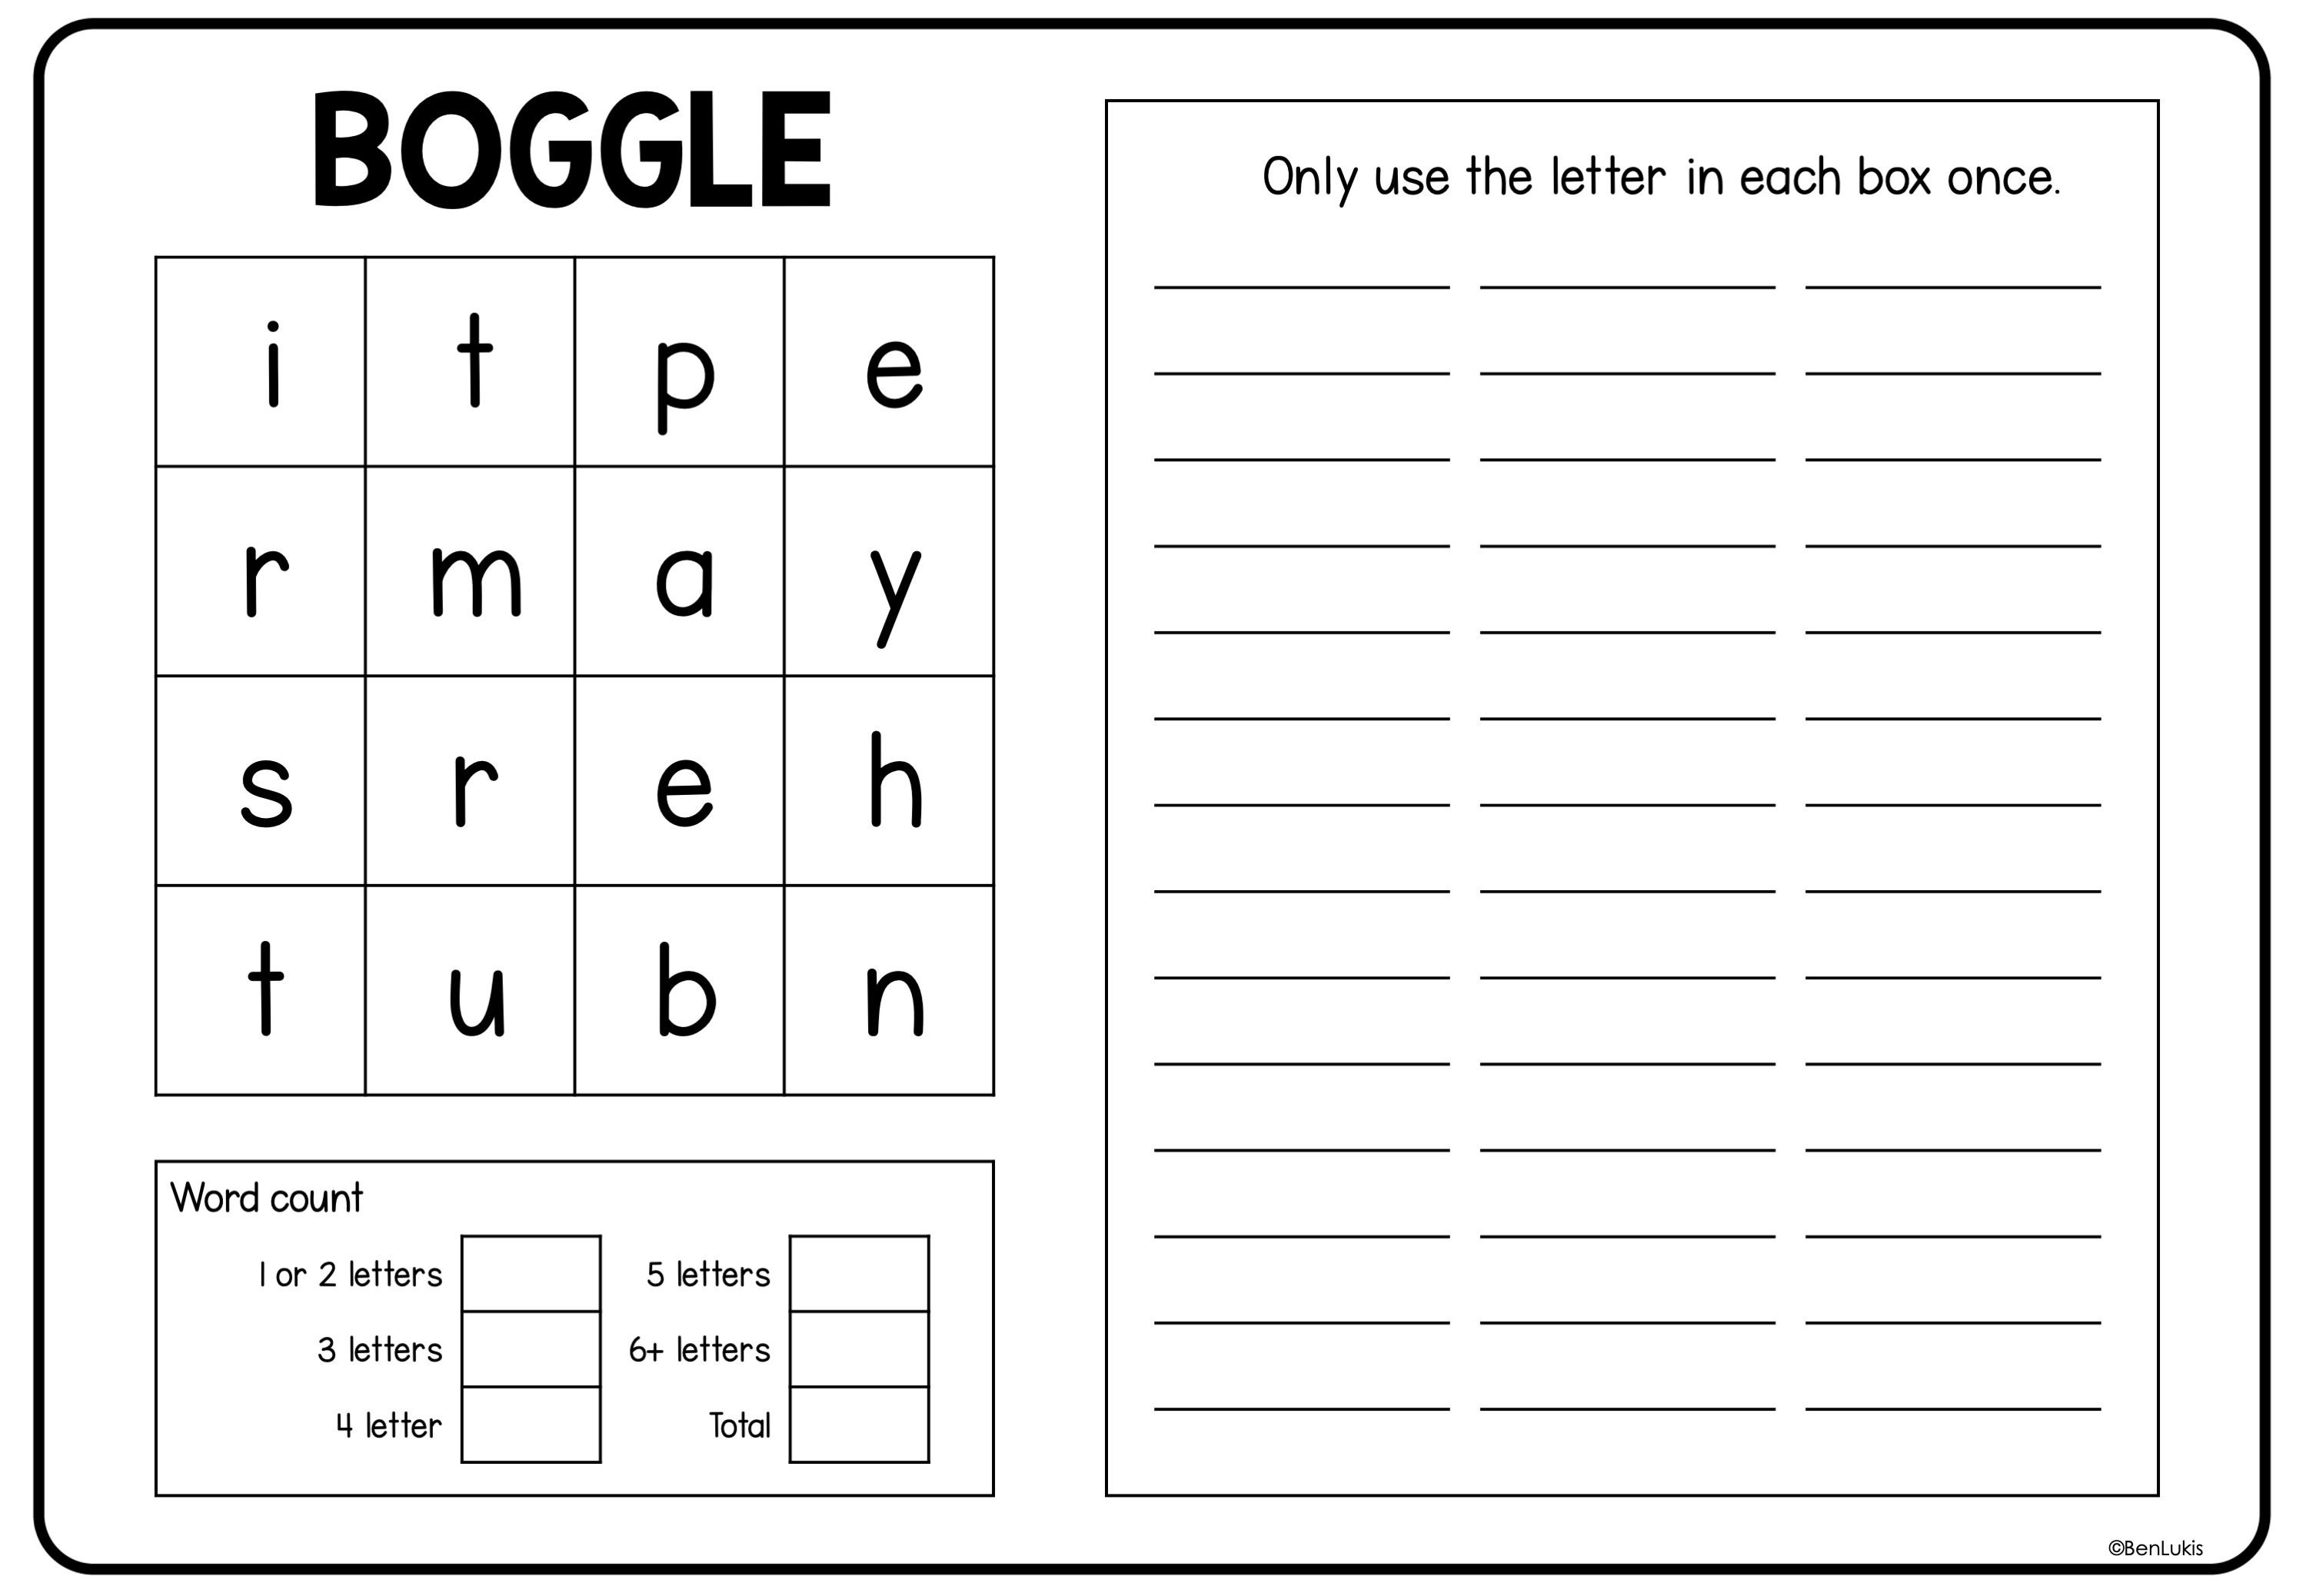 boggle-word-game-printable-pages-printable-word-puzzle-pages-etsy